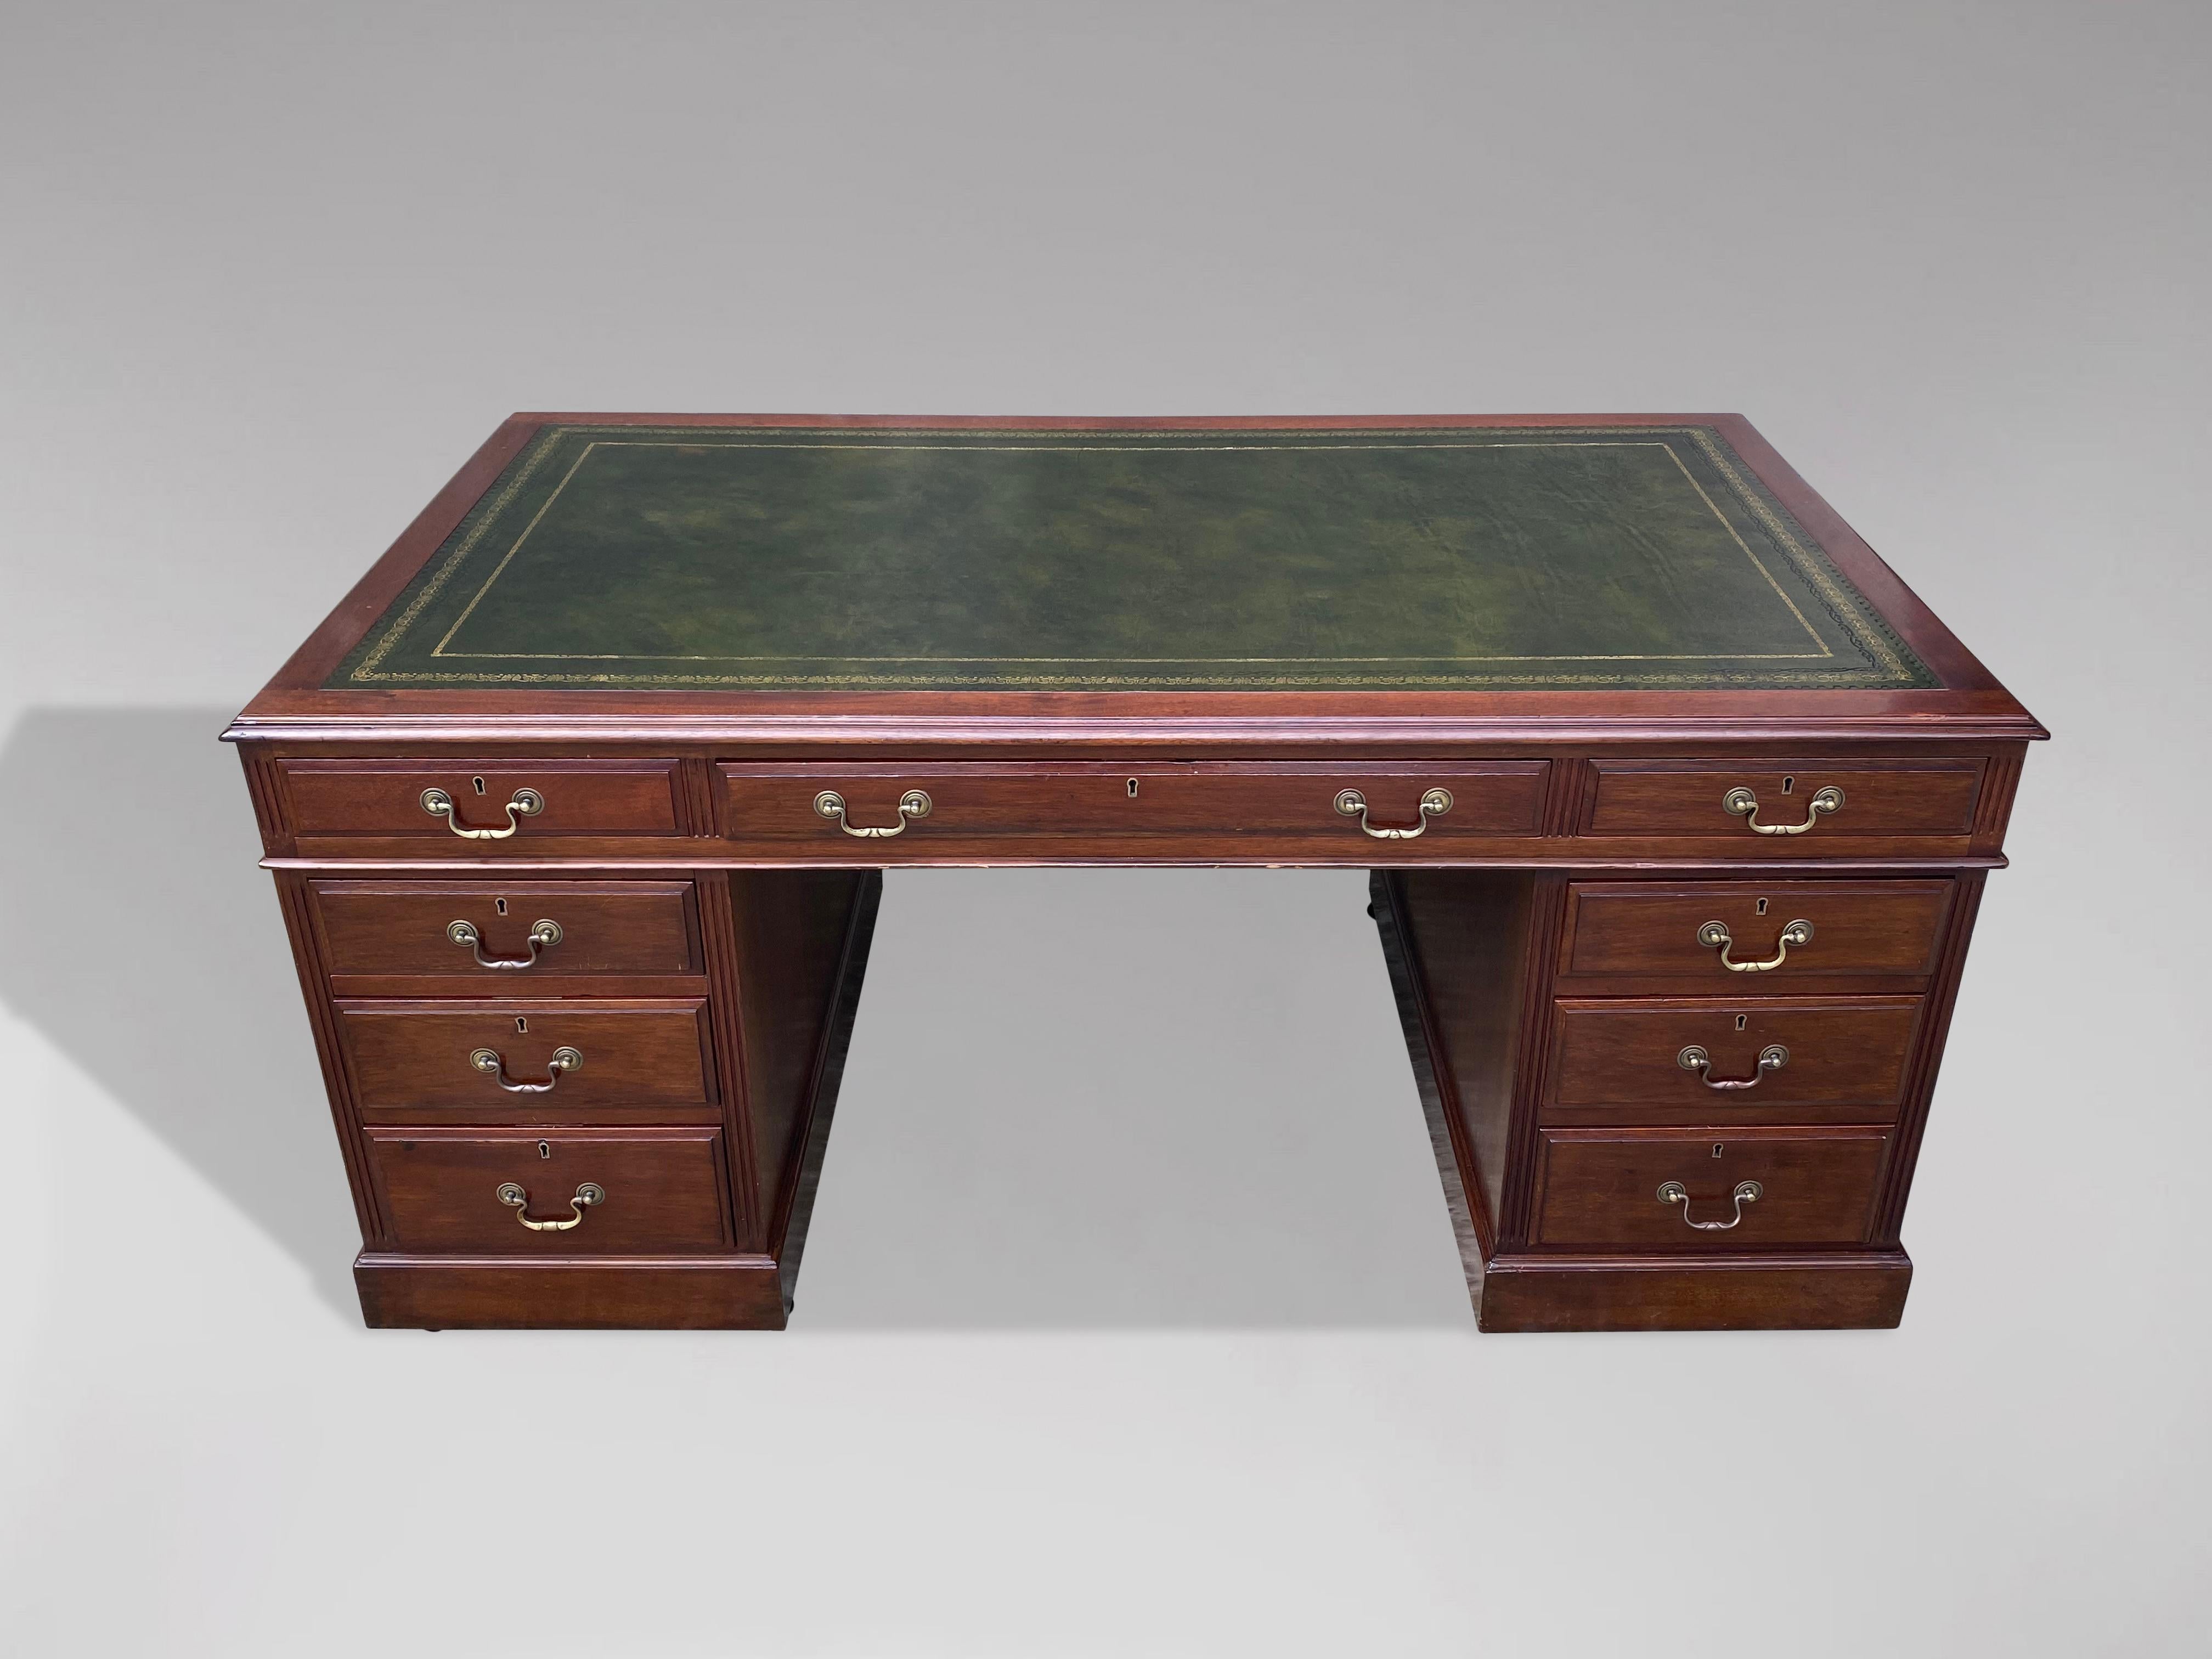 A fine quality, large late 19th century mahogany desk with nine mahogany lined drawers. The quality green tooled leather inset to top with thumb moulded edge, above one long and two short drawers over two pedestals, each with three graduated drawers